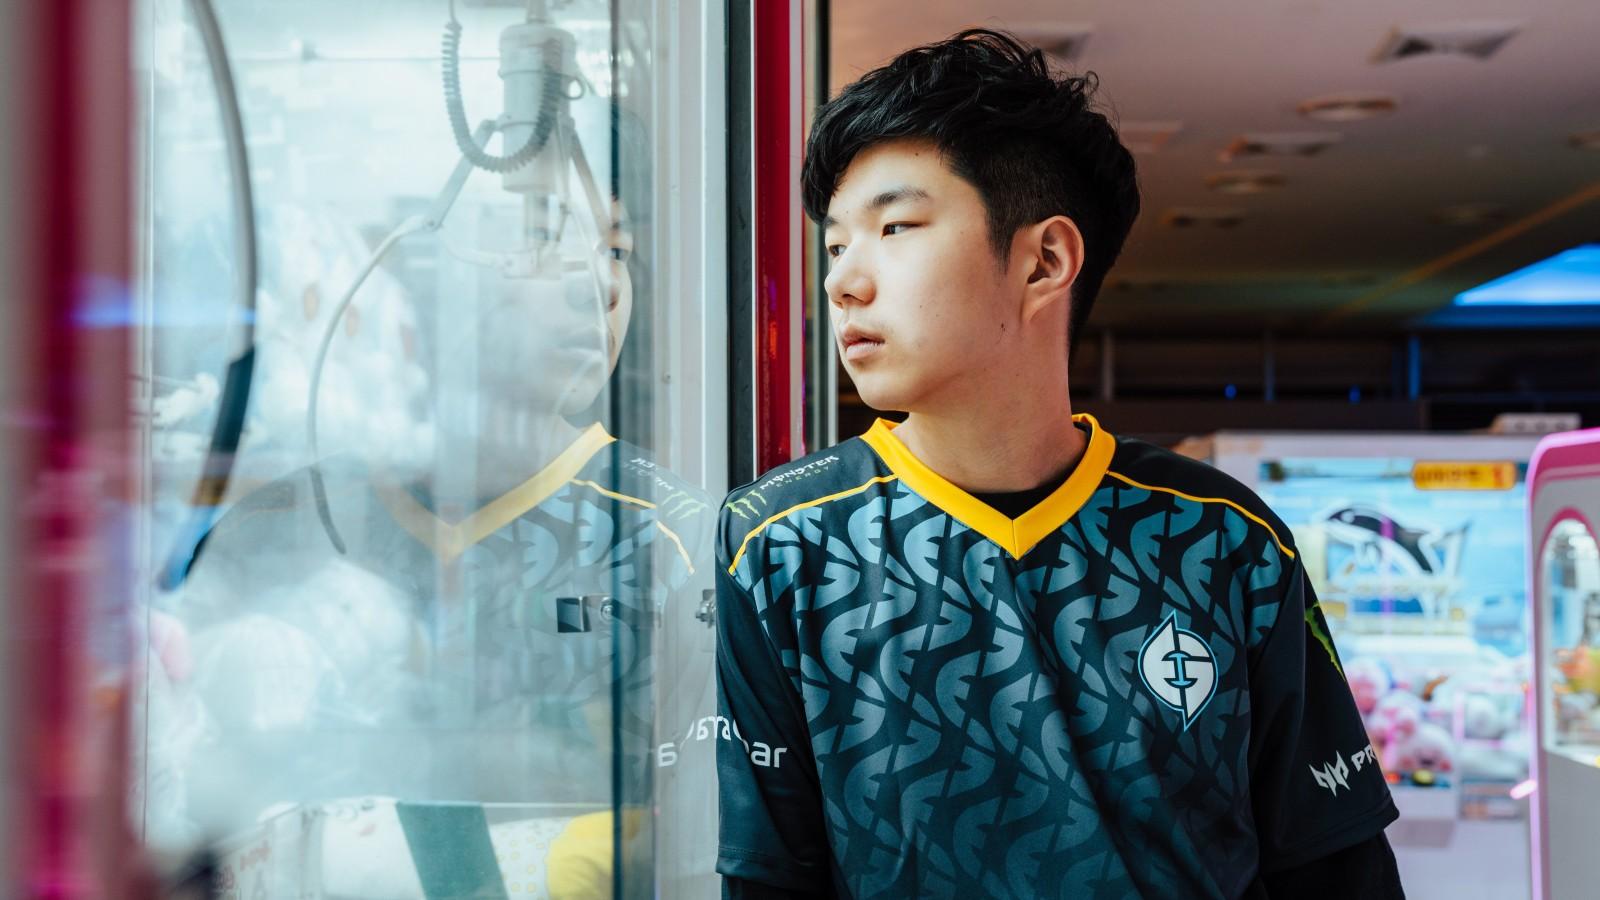 League of Legends Trash Talk: MSI 2019 - Player of Team G2 Esports claims  to crush Faker, and the boss laughs with tears because all practice match  lose - Not A Gamer